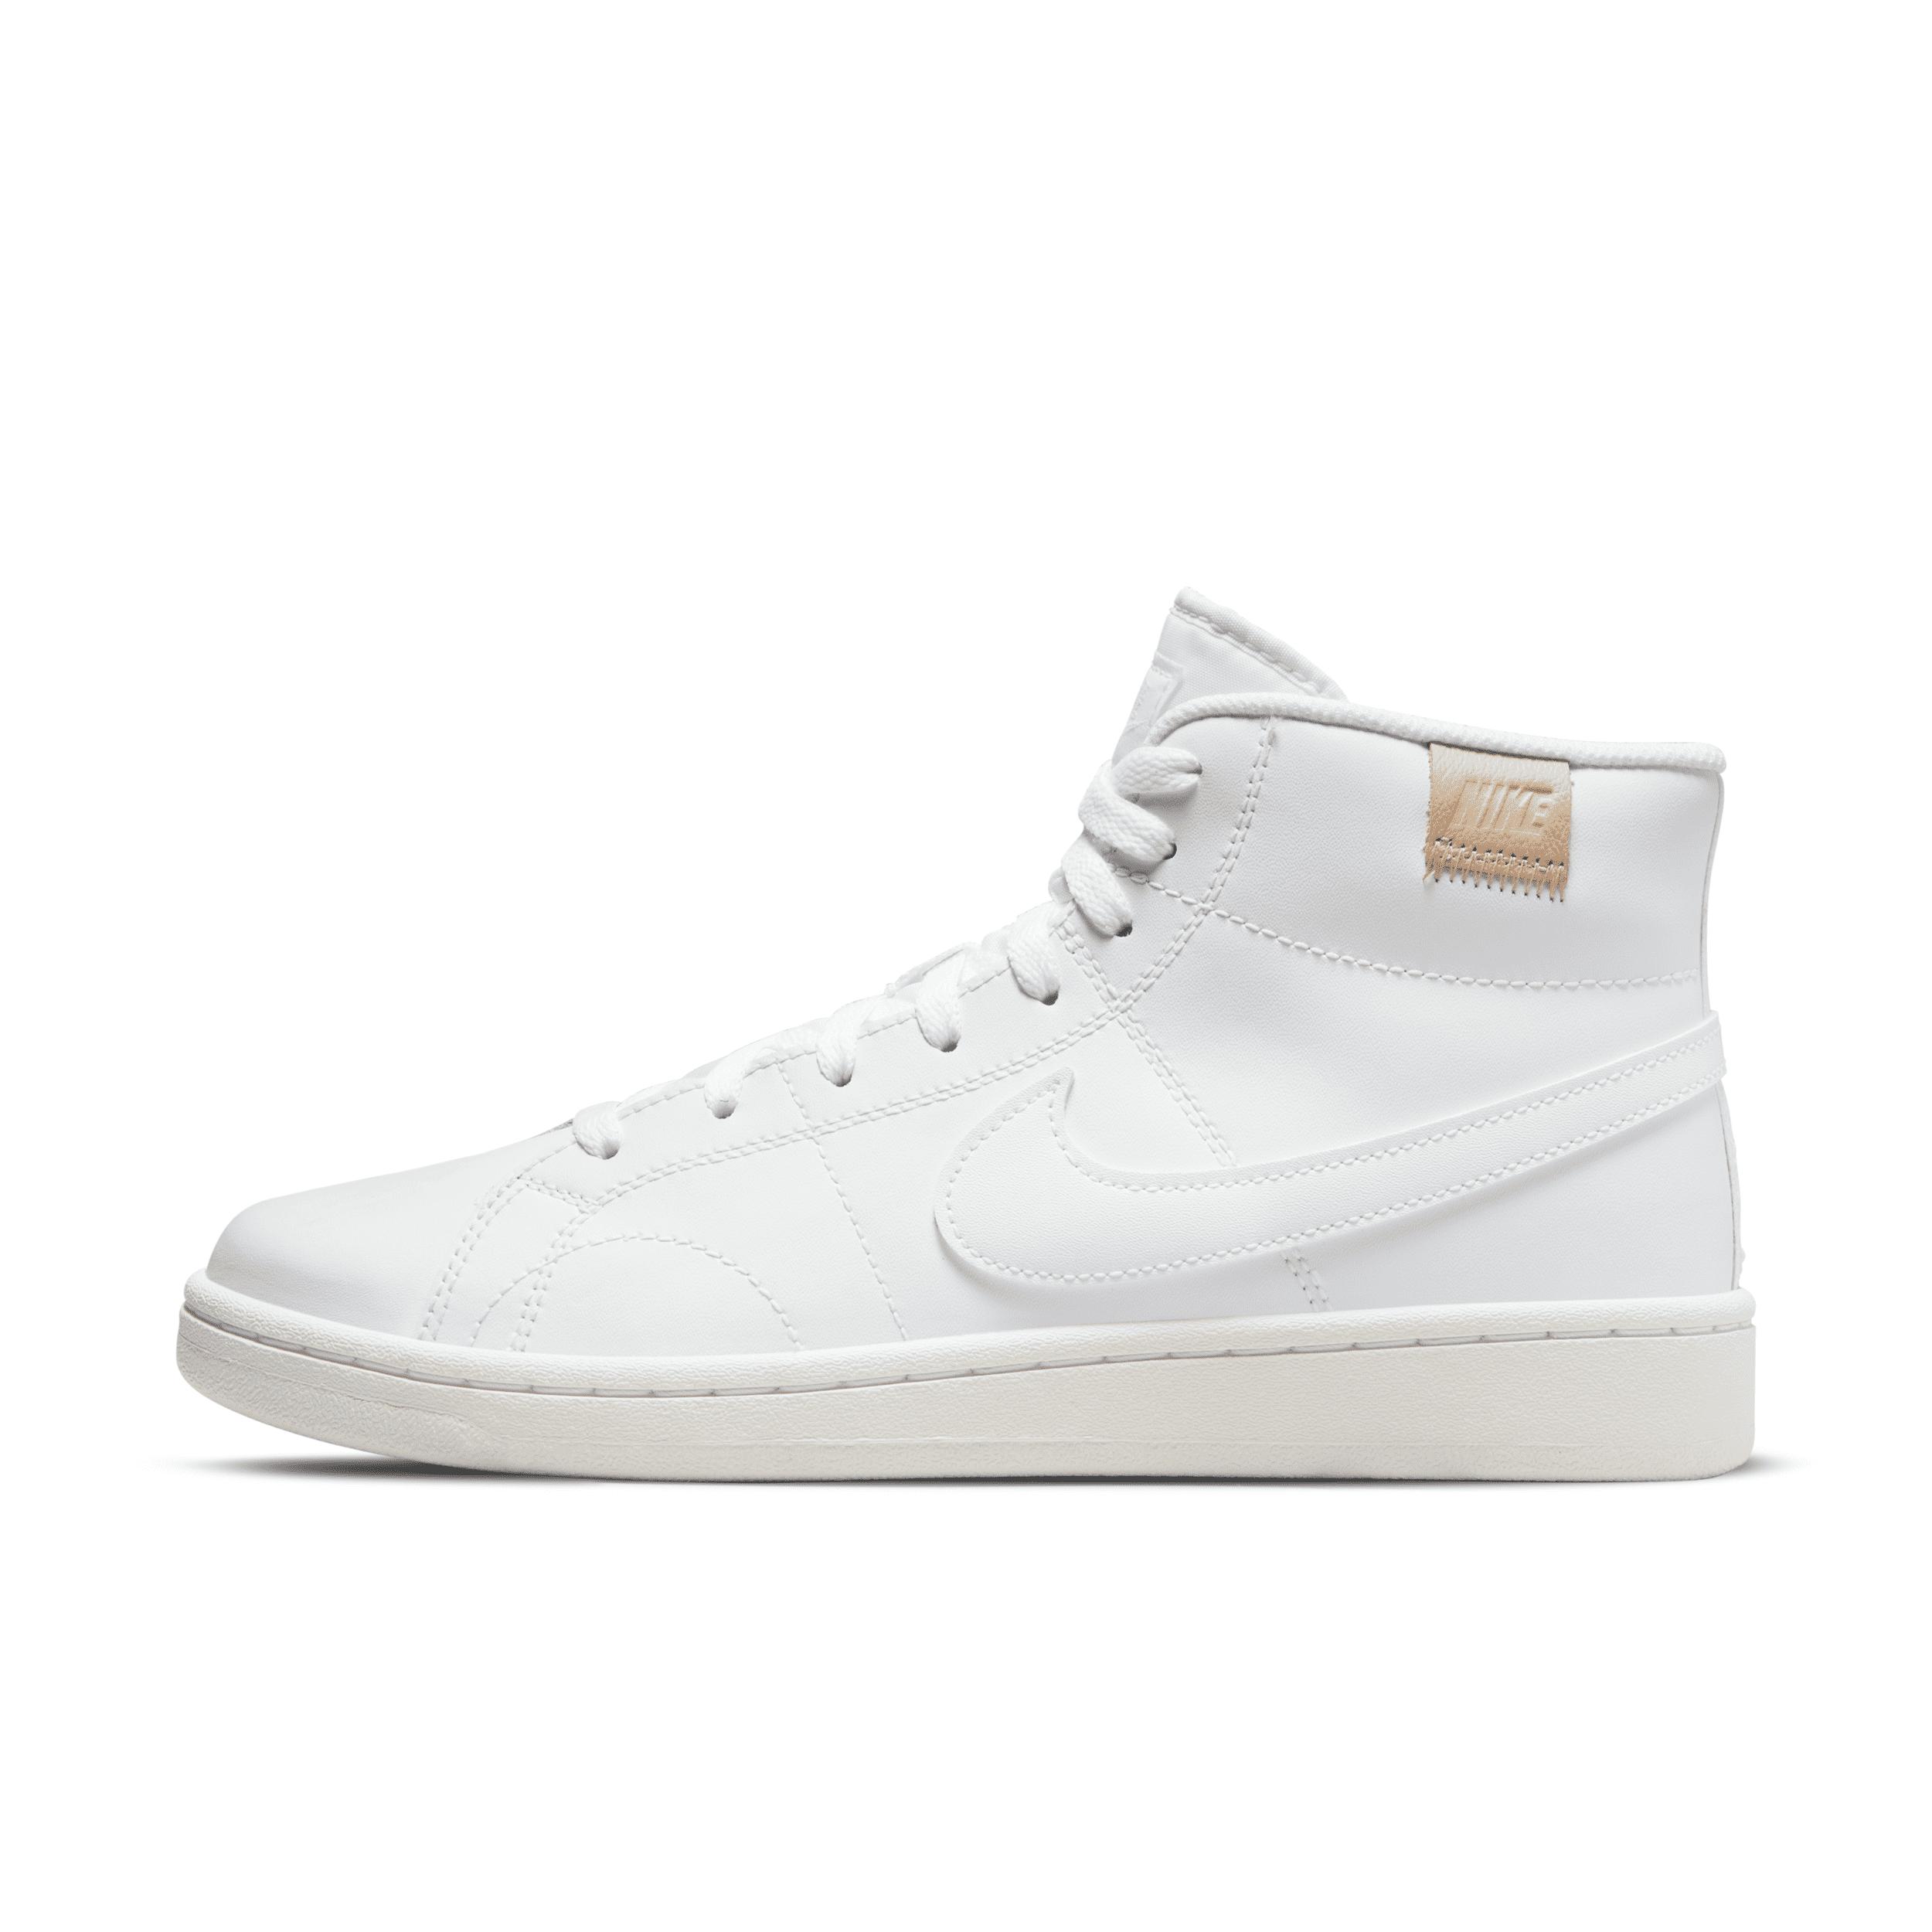 Nike Court Royale 2 Mid Shoe in White | Lyst